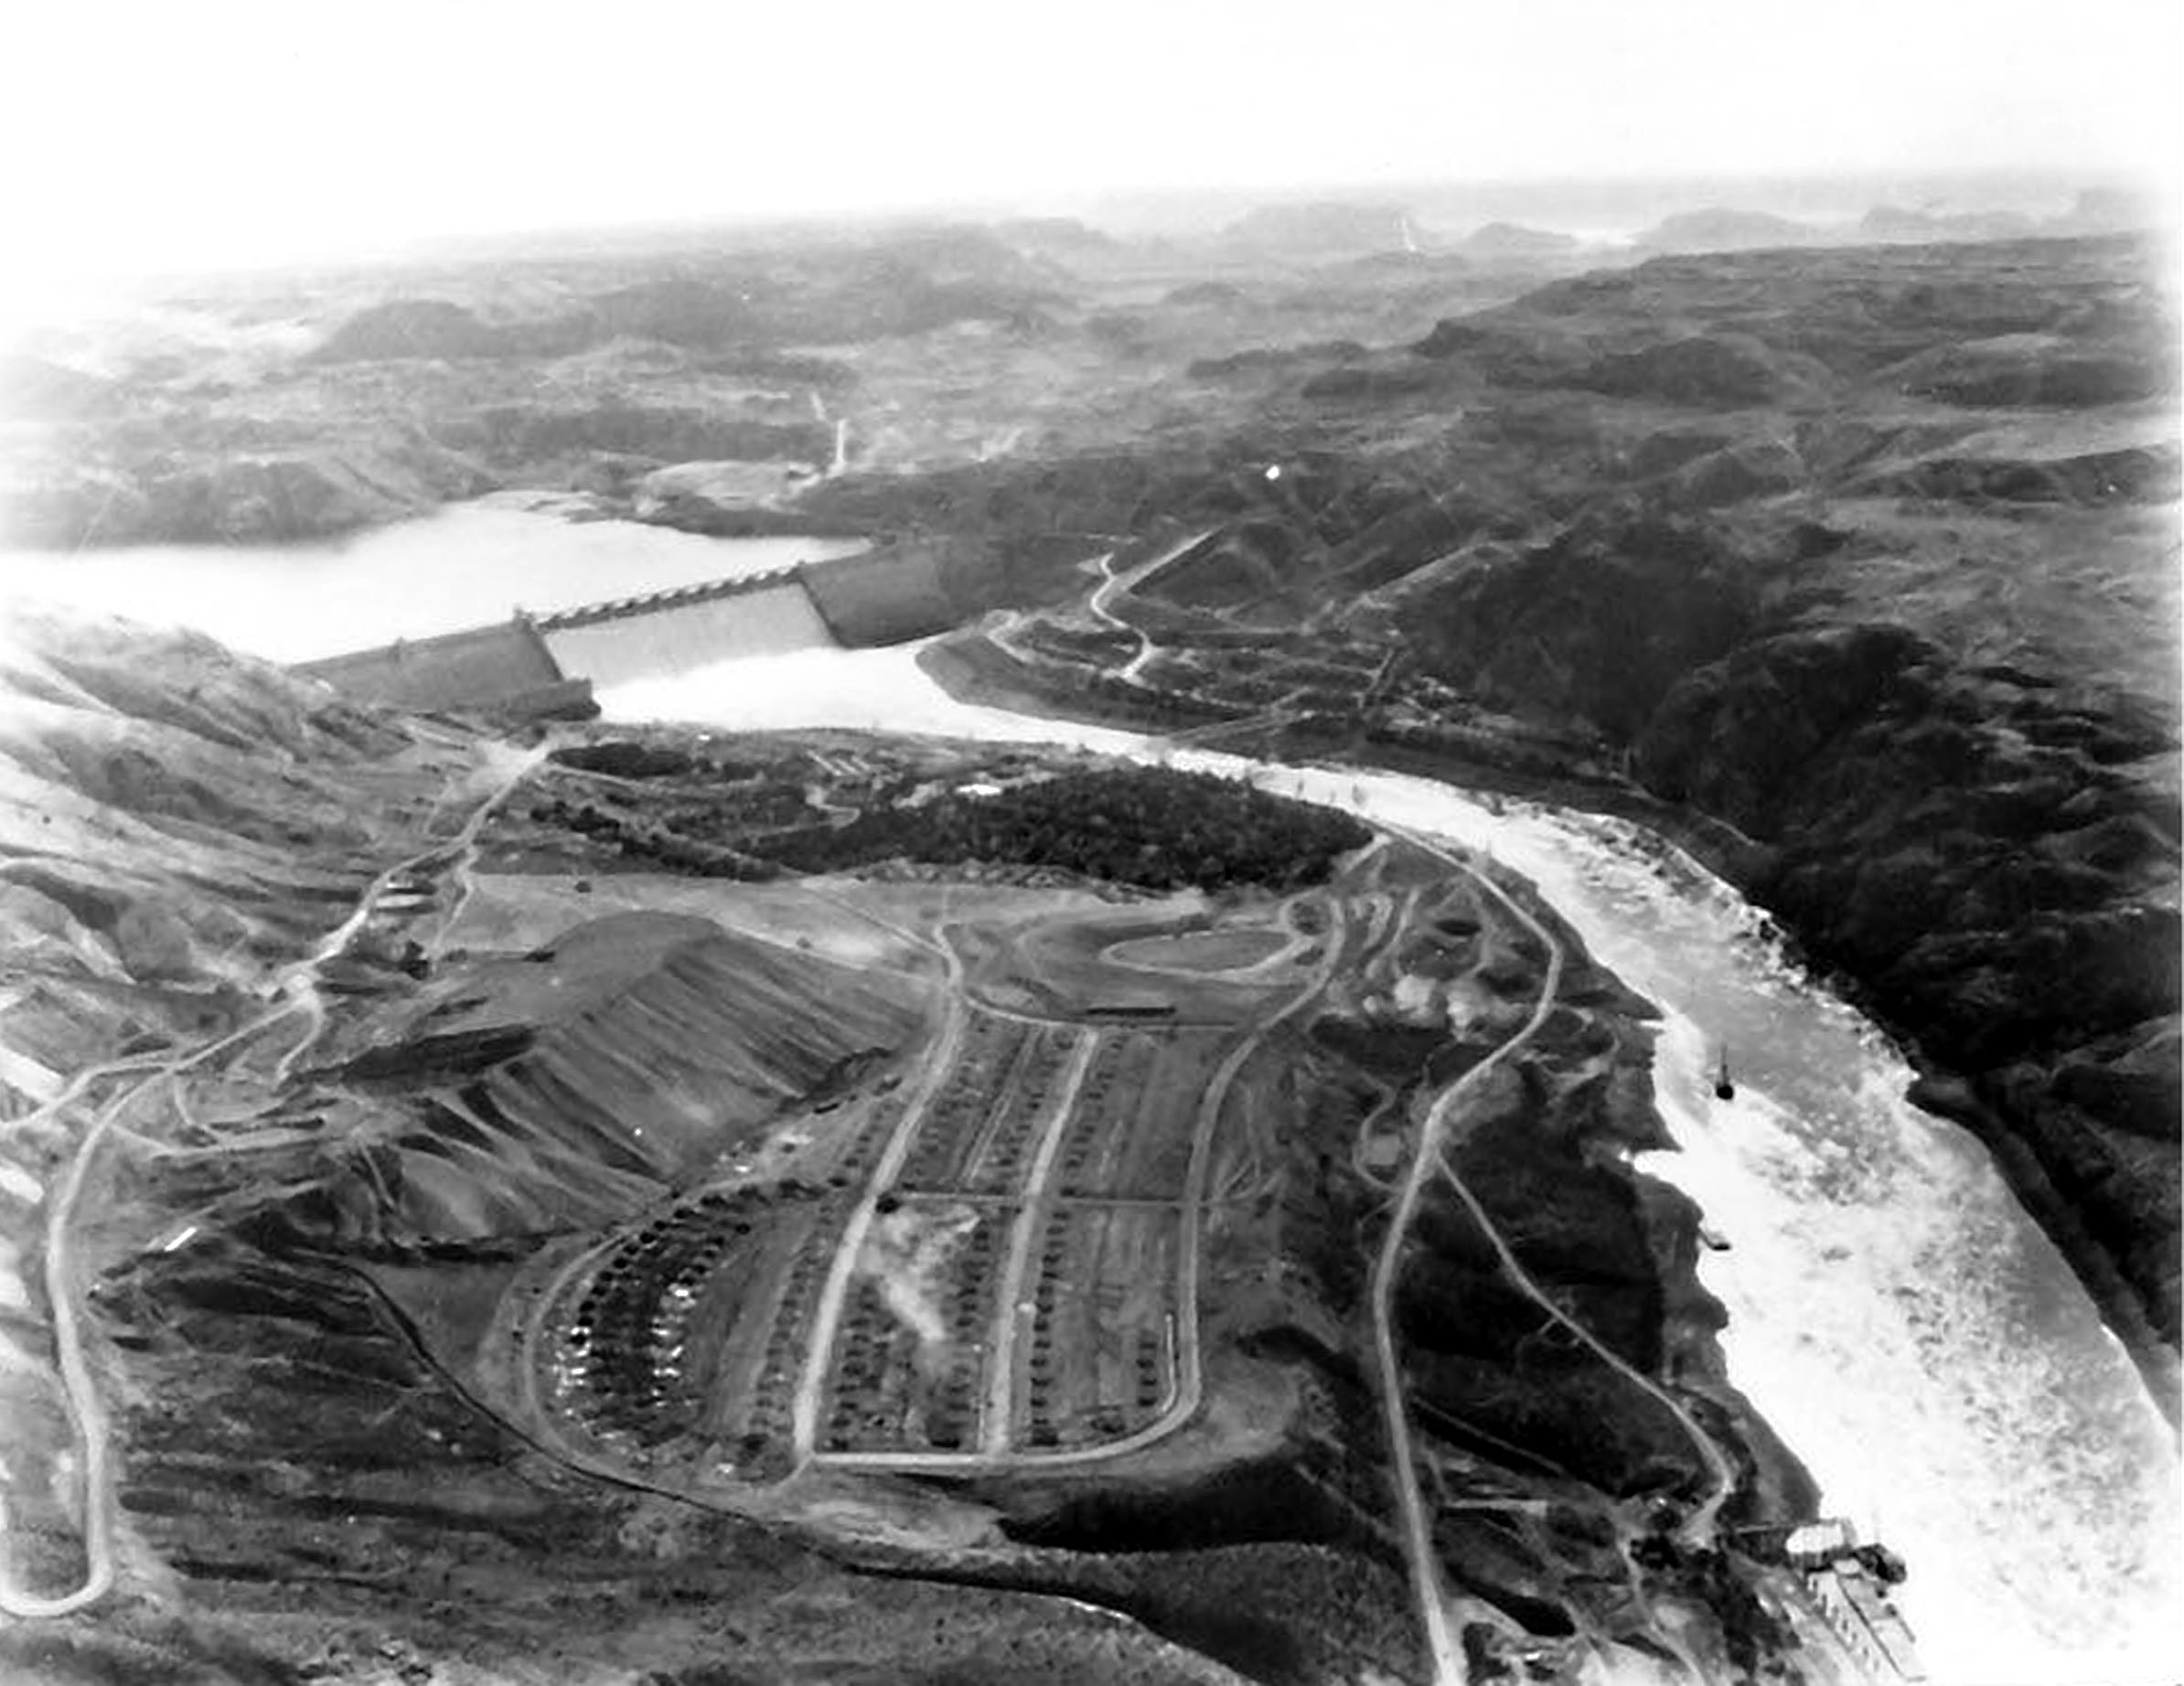 Photo taken September 19, 1946. Mason City (Coulee Dam) in foreground with Engineers Town across river and Grand Coulee top center.